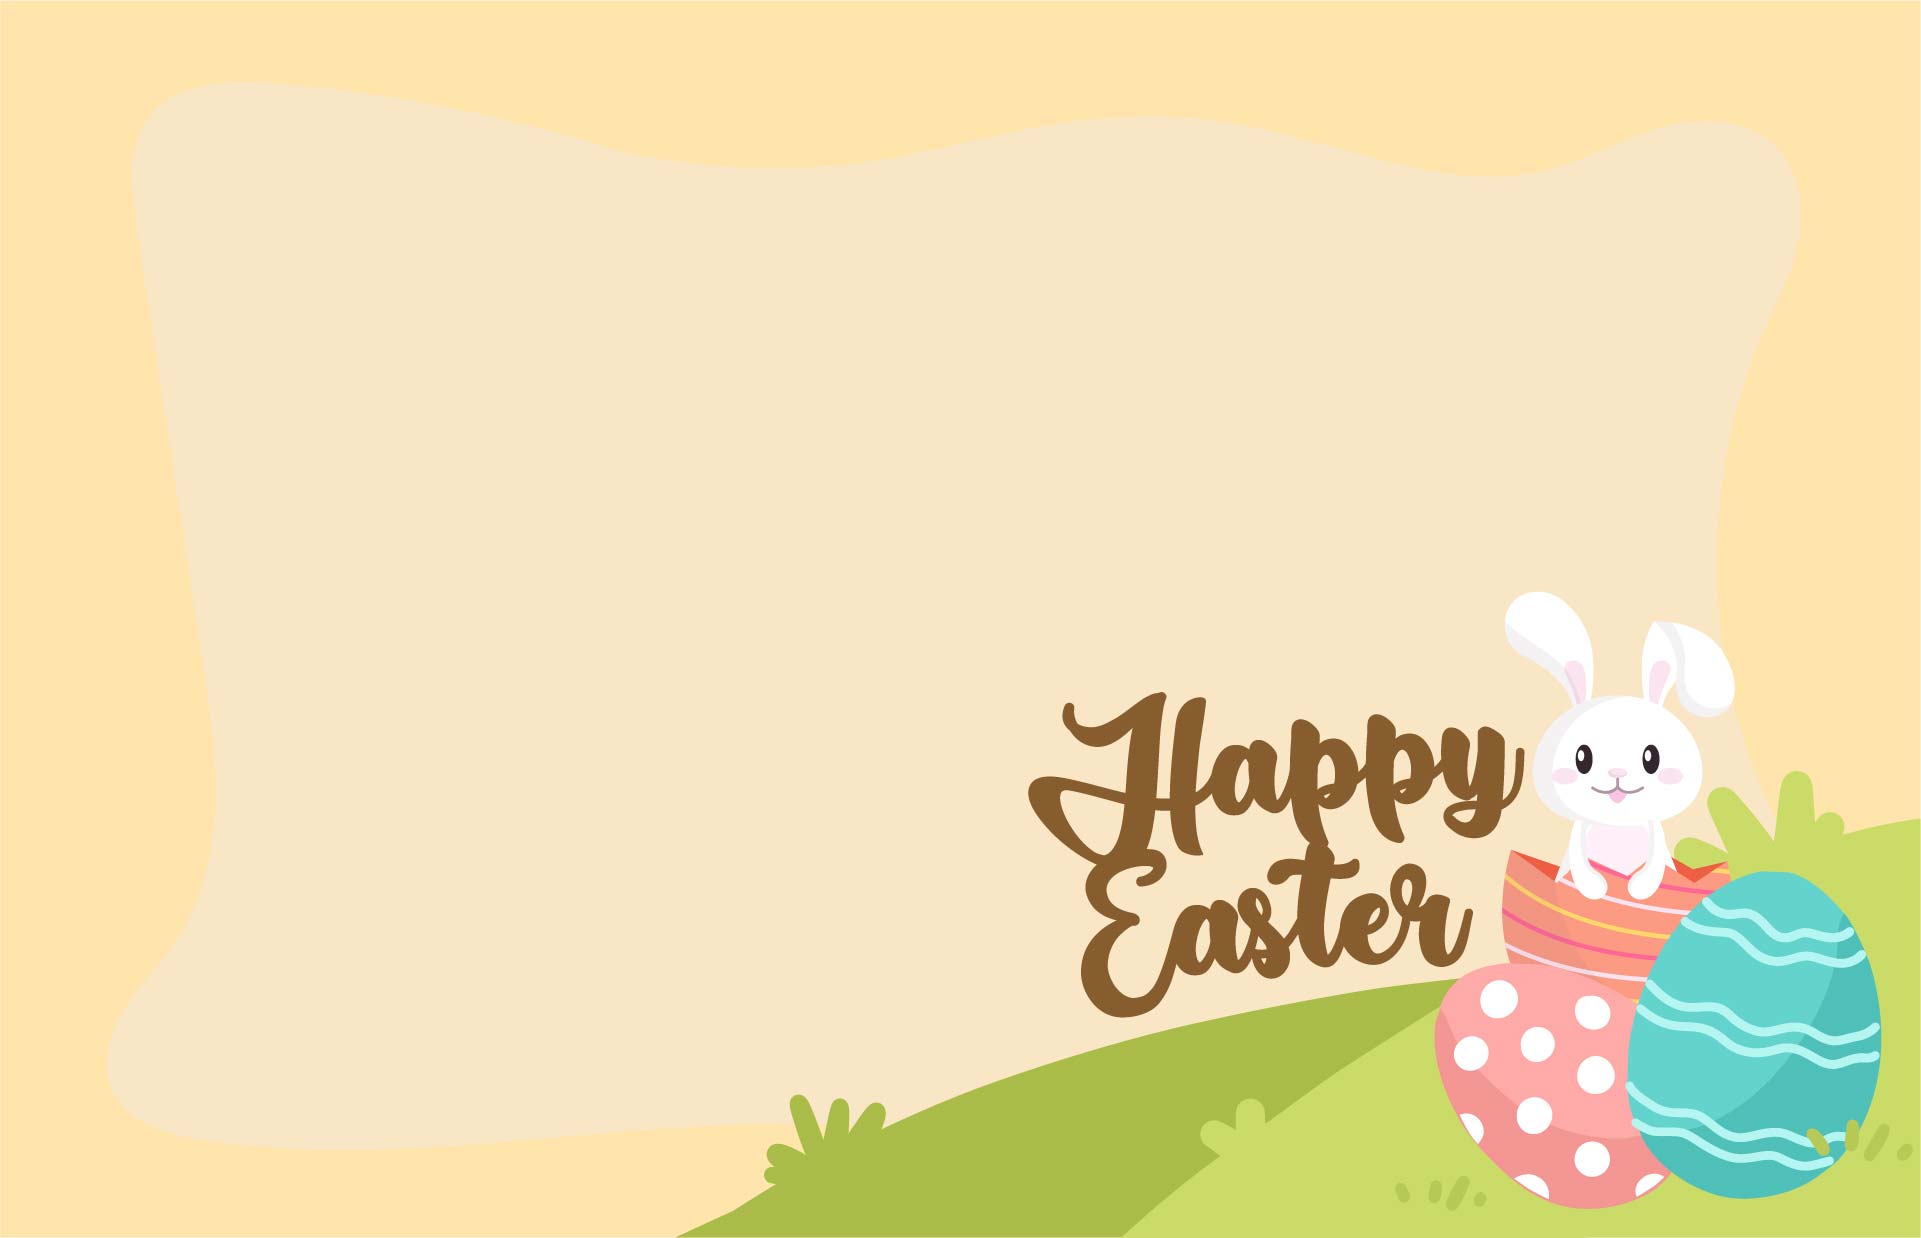 Funny Printable Easter Cards